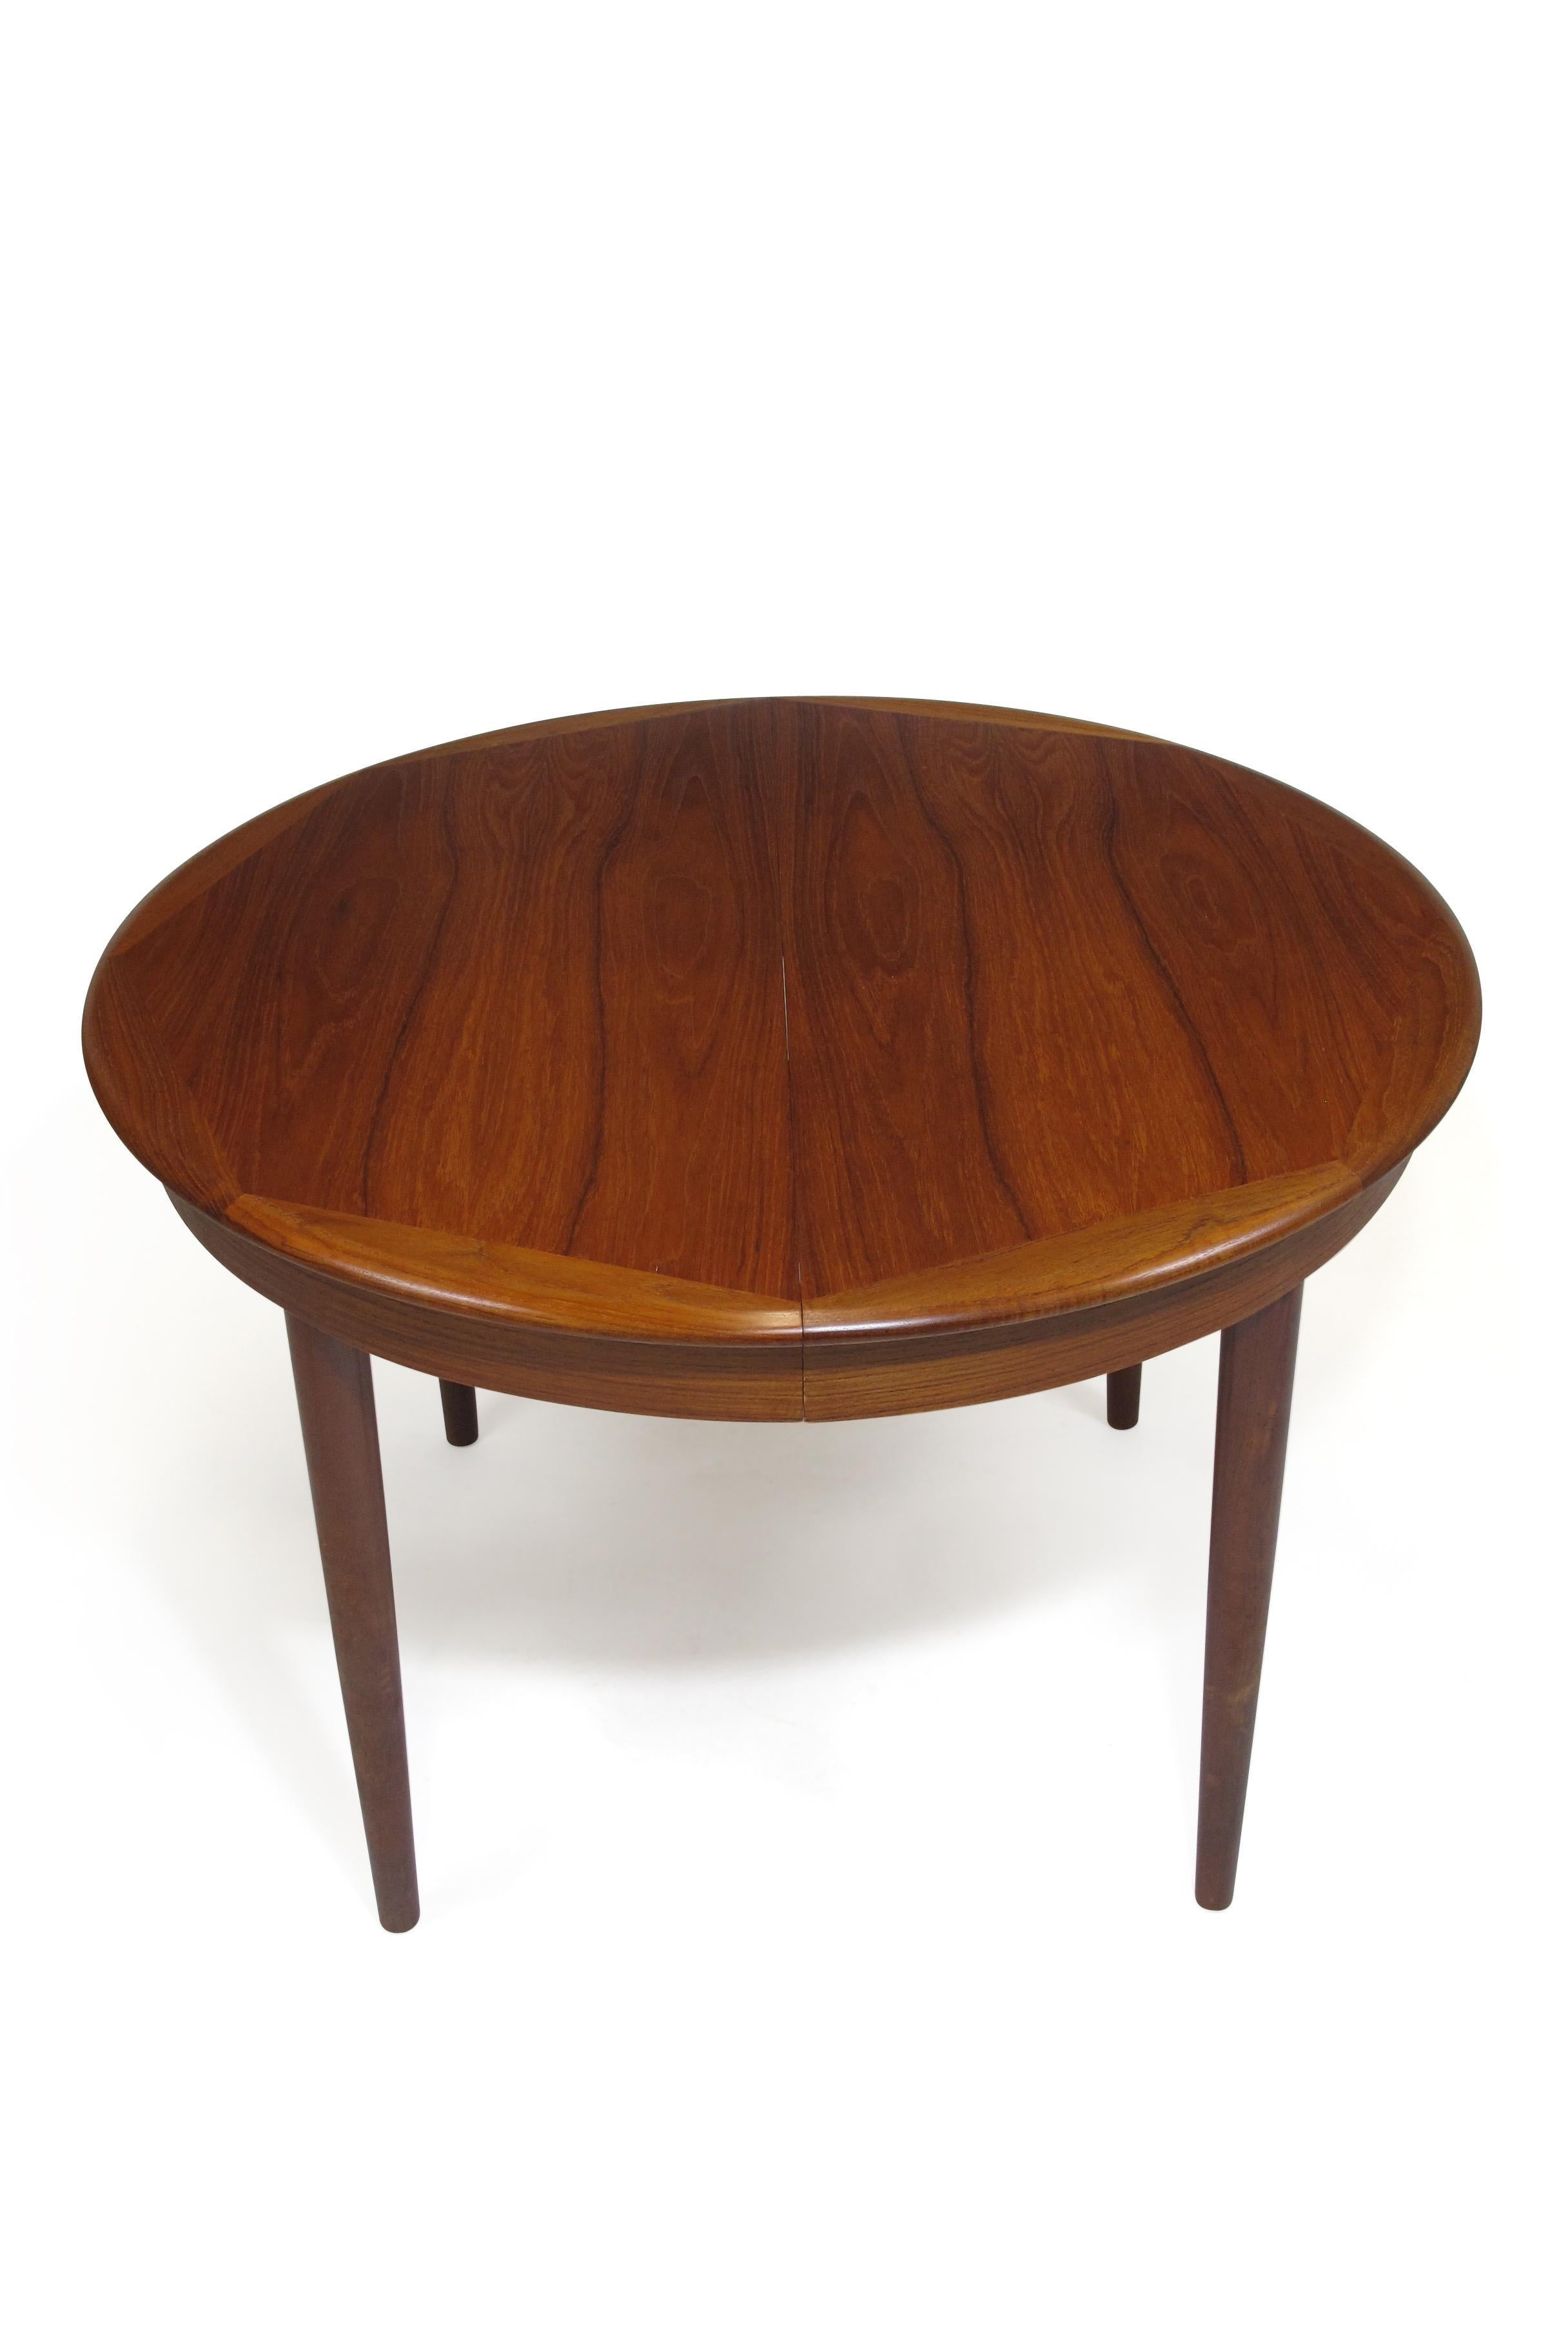 Midcentury Round Danish Teak Dining Table, Seats 4-10 Guests In Excellent Condition In Oakland, CA